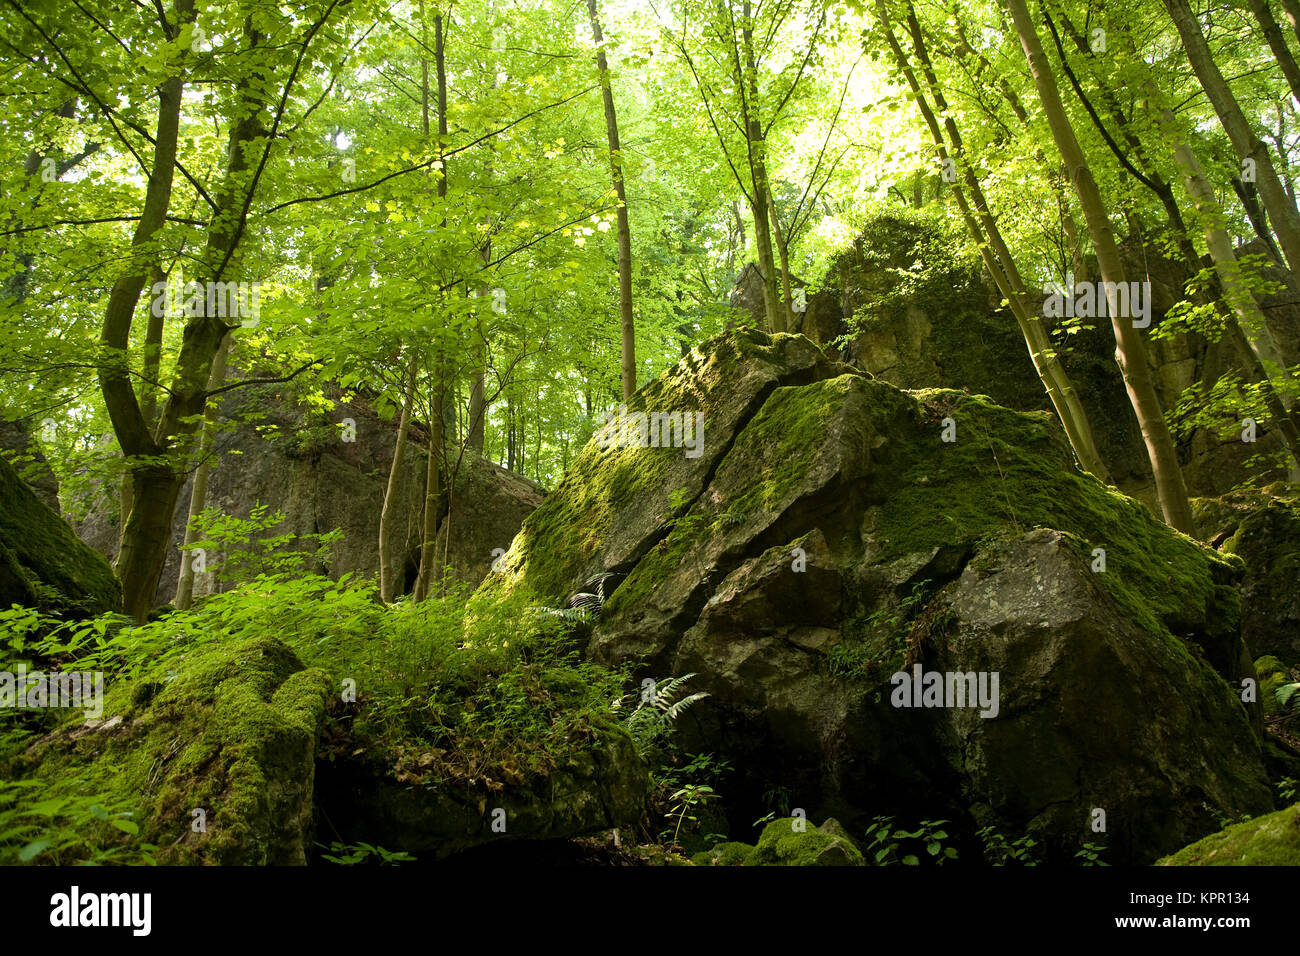 Europe, Germany, Sauerland region, the Hemer Felsenmeer, stone run [the Felsenmeer is formed by karst formation and by the collapses of caves under th Stock Photo